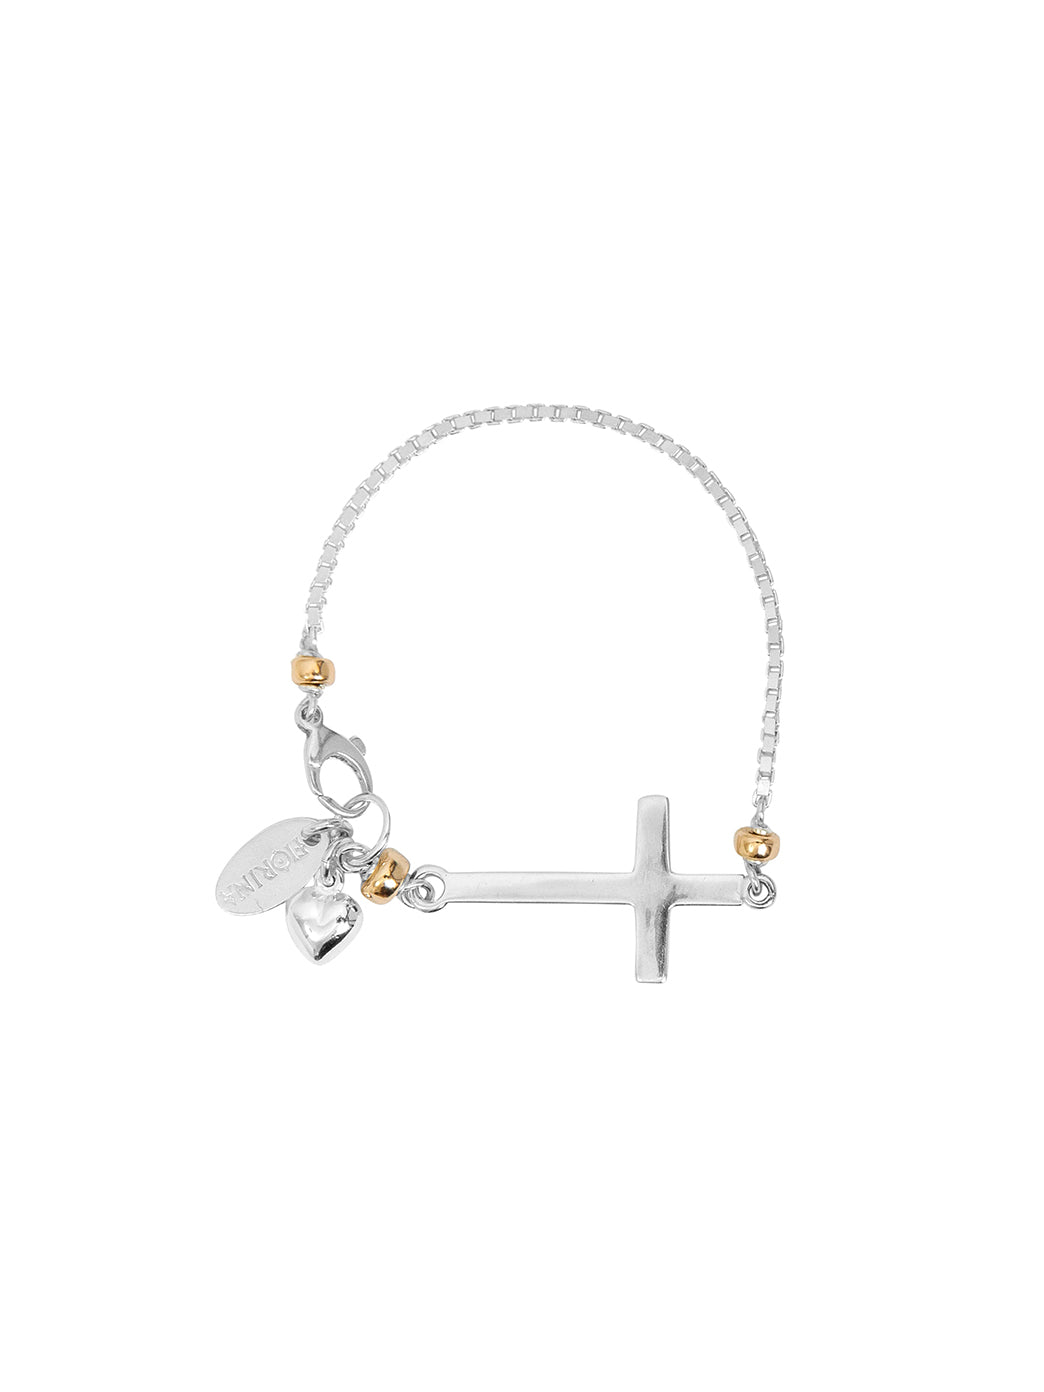 Kids/Girls Blessed Bracelet: Gold Chain with Ivory Star-Shaped Cross –  taudrey